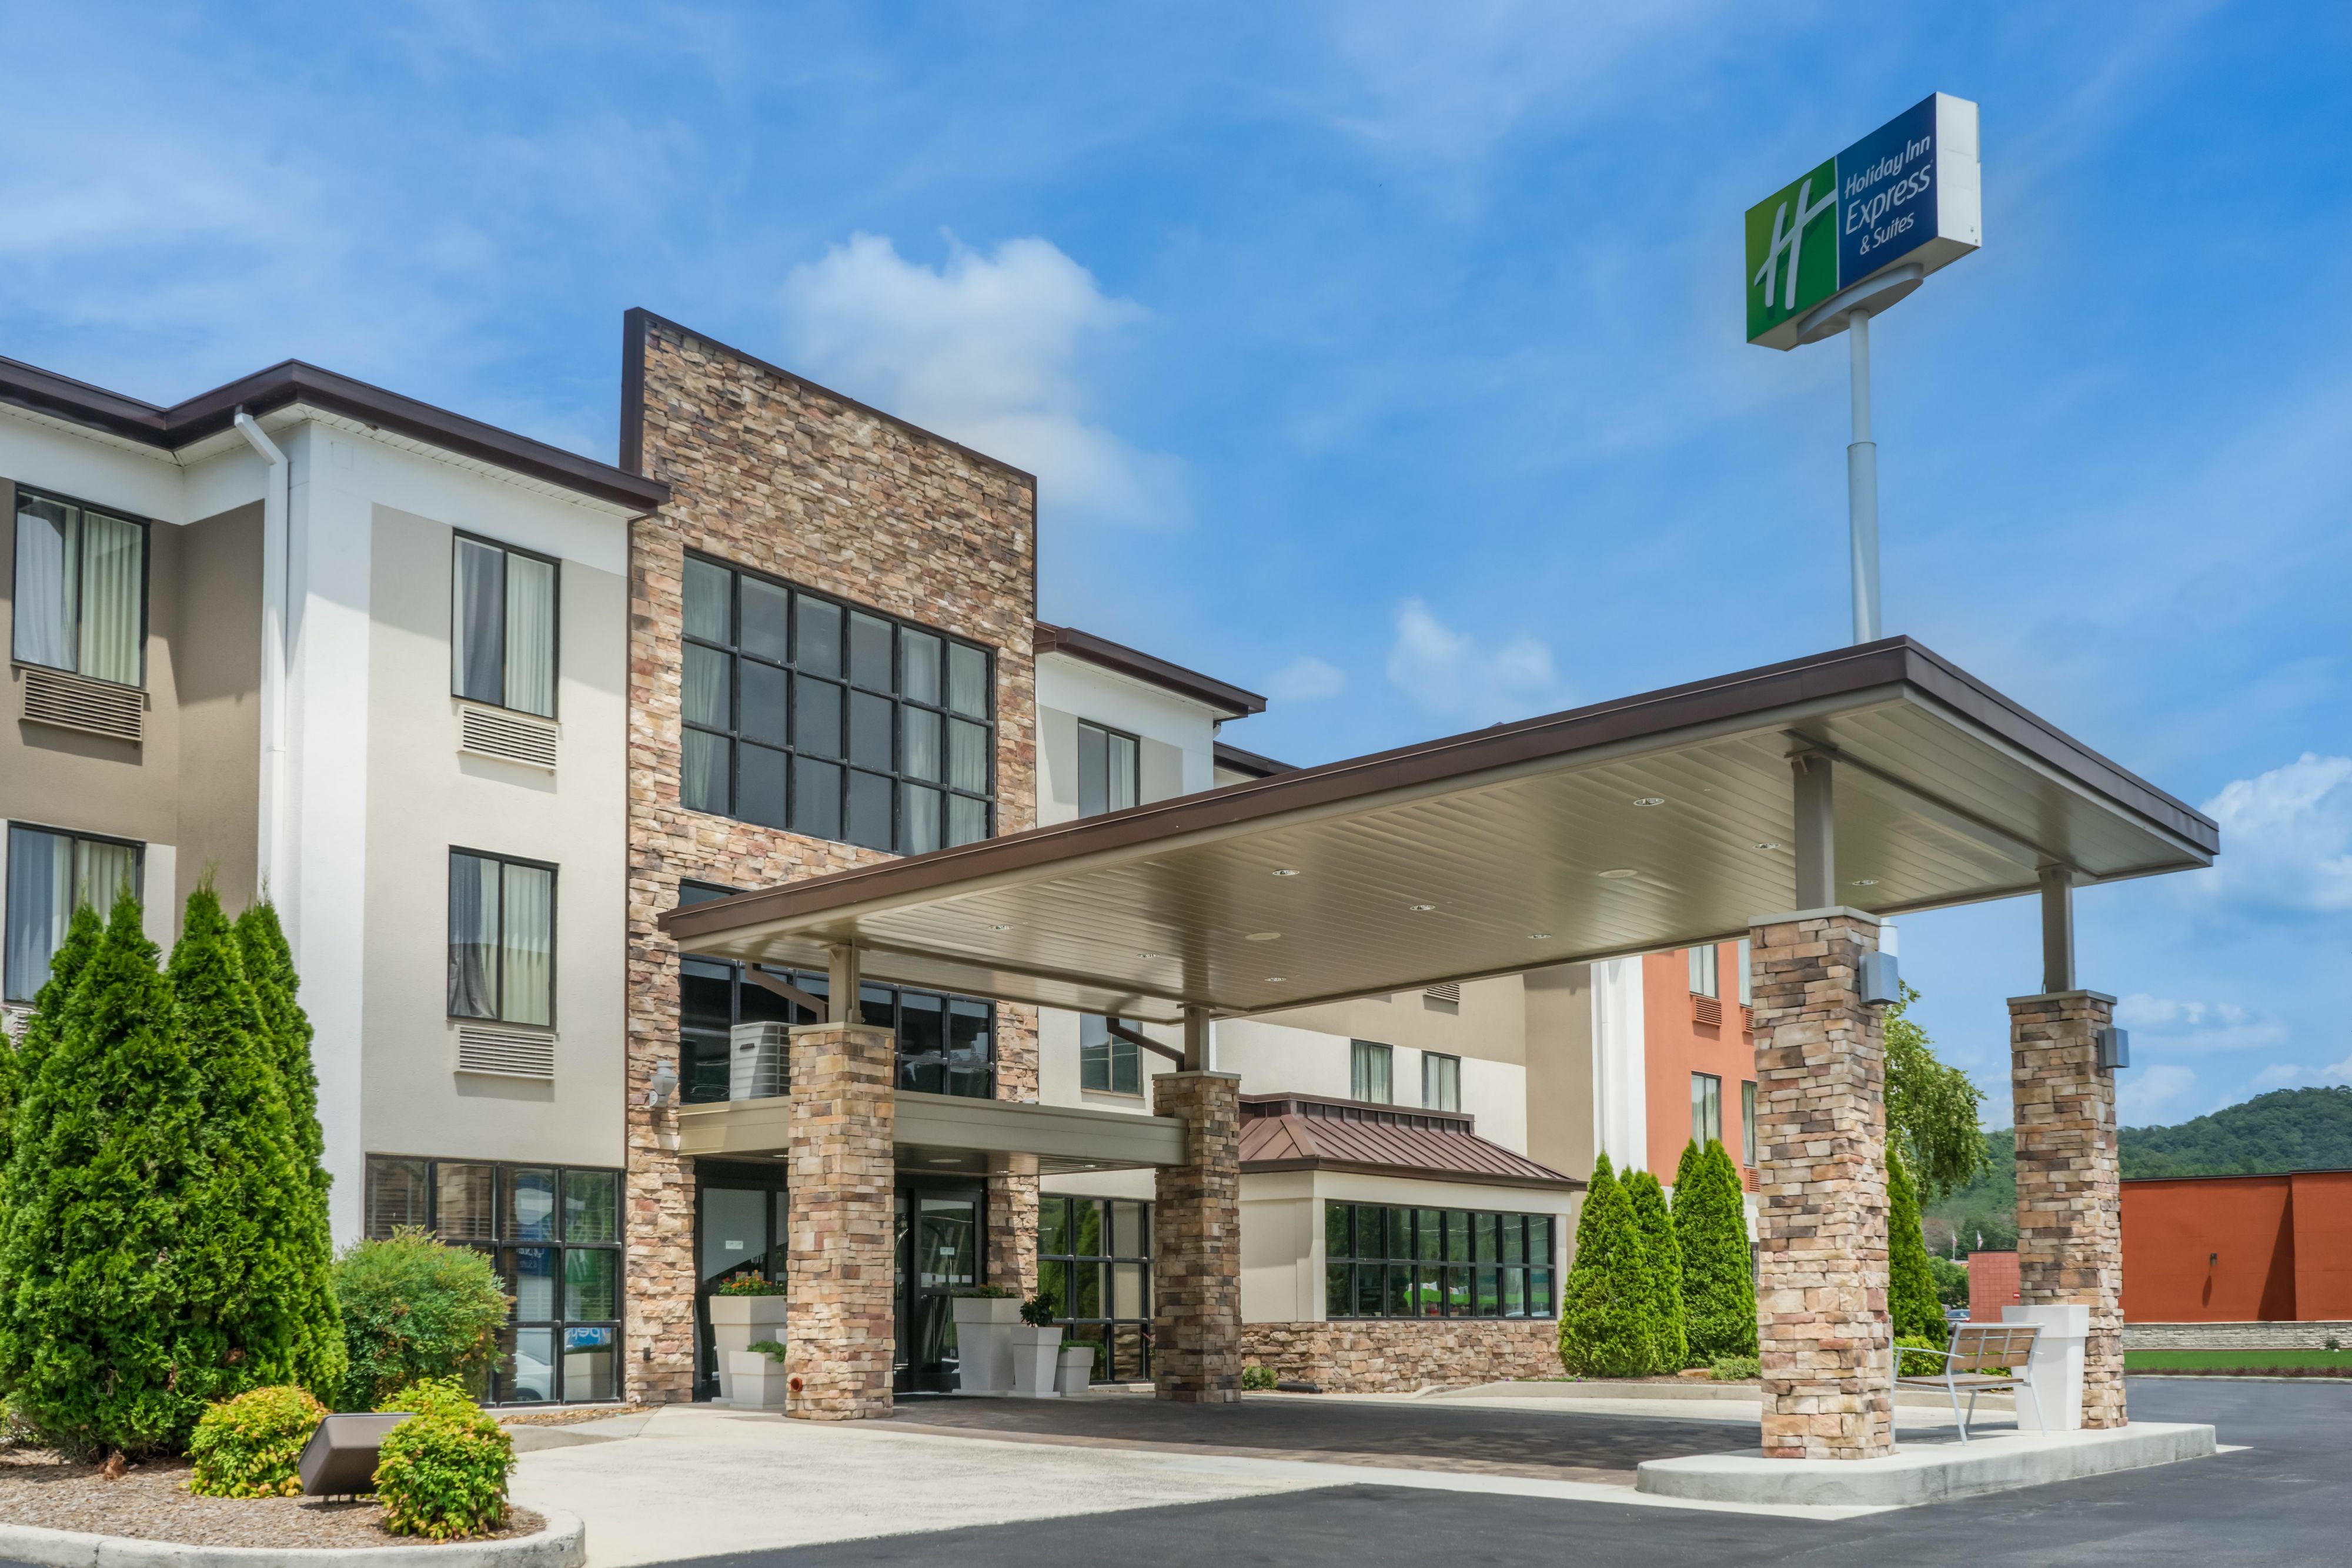 Photo of Holiday Inn Express & Suites Fort Payne, Fort Payne, AL